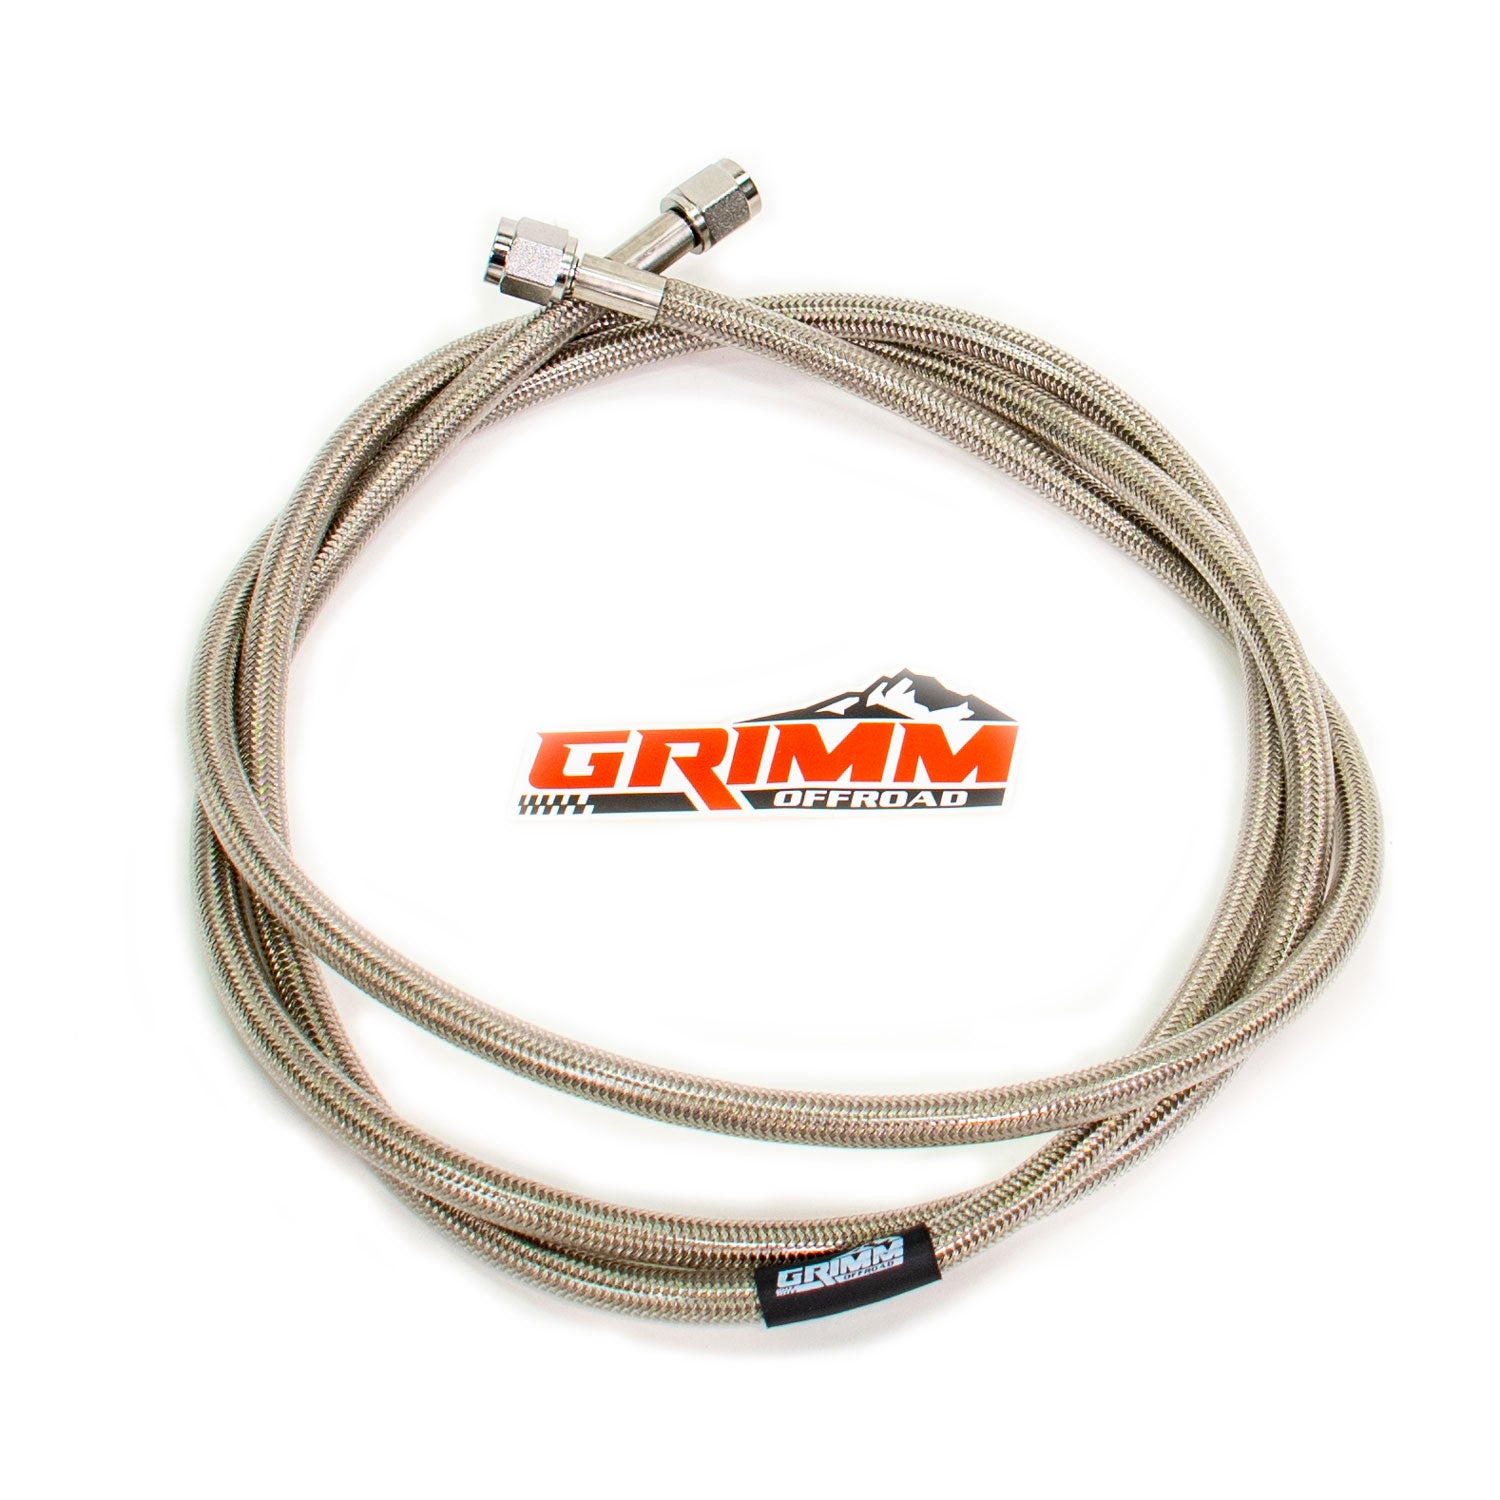 Grimm OffRoad Stainless Steel Braided Air Hose